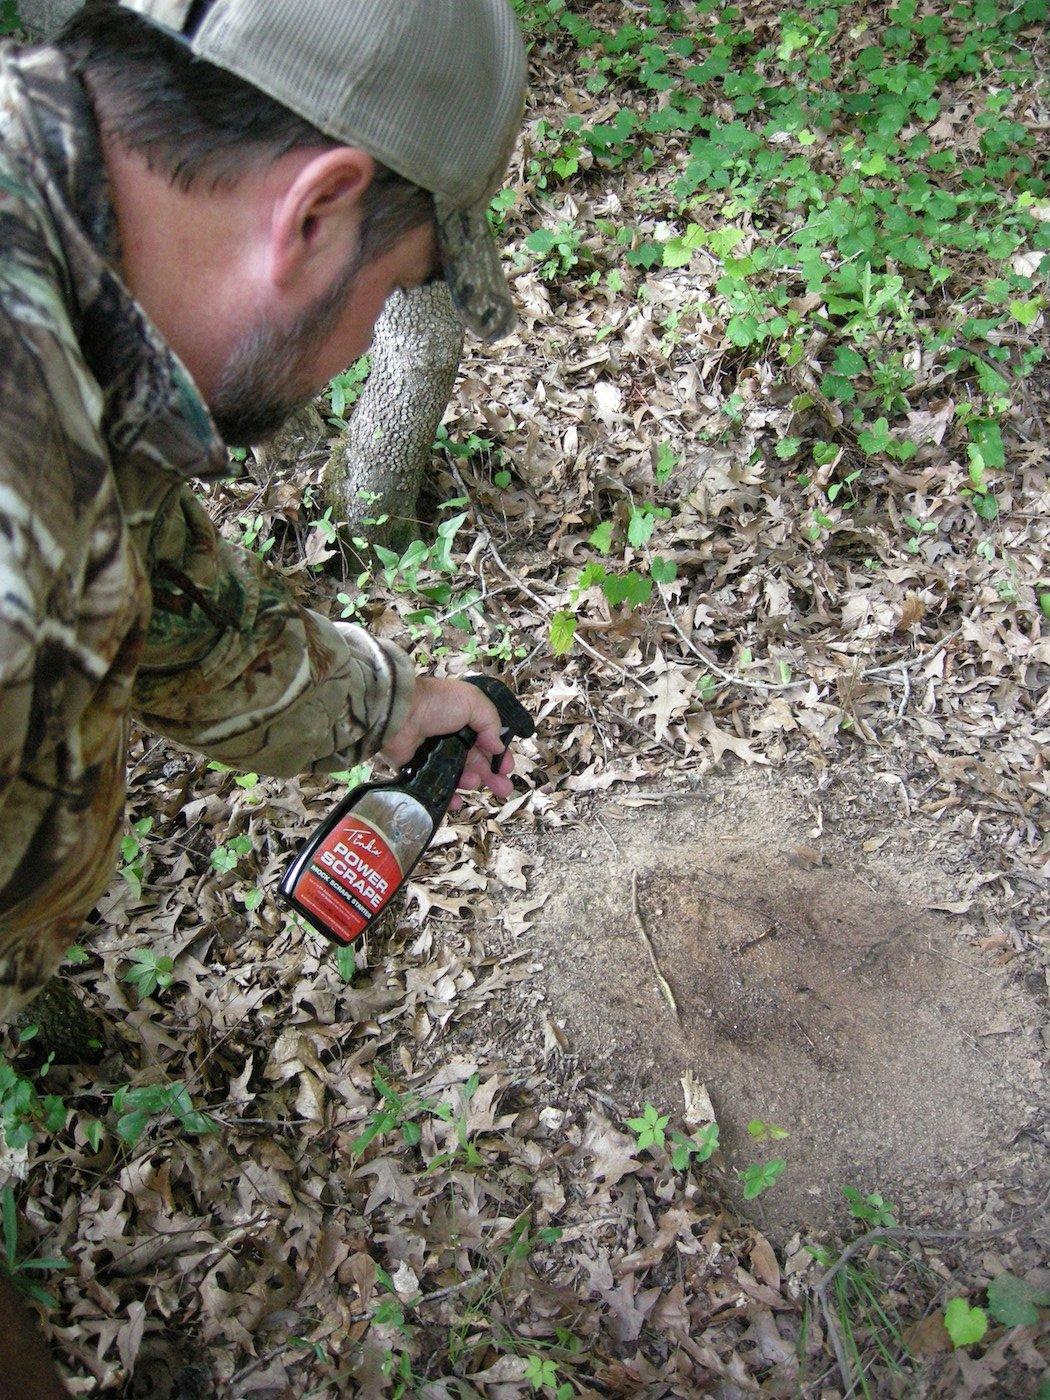 Adding whitetail scent to an existing scrape, or scrape seeding, is a worthwhile ploy during whitetail rut dates. (Photo courtesy of Tink's)